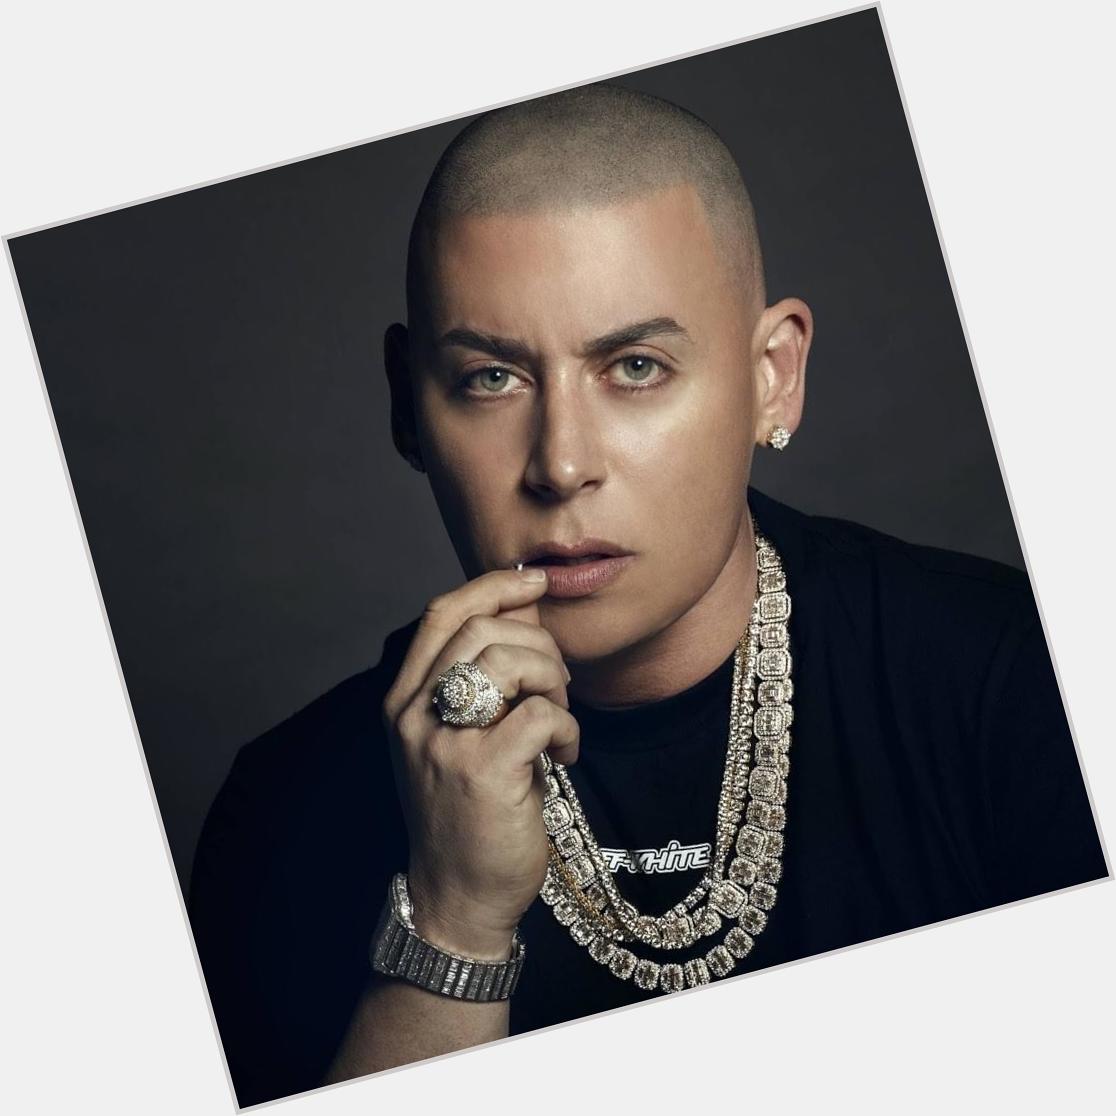 Cosculluela dating 2